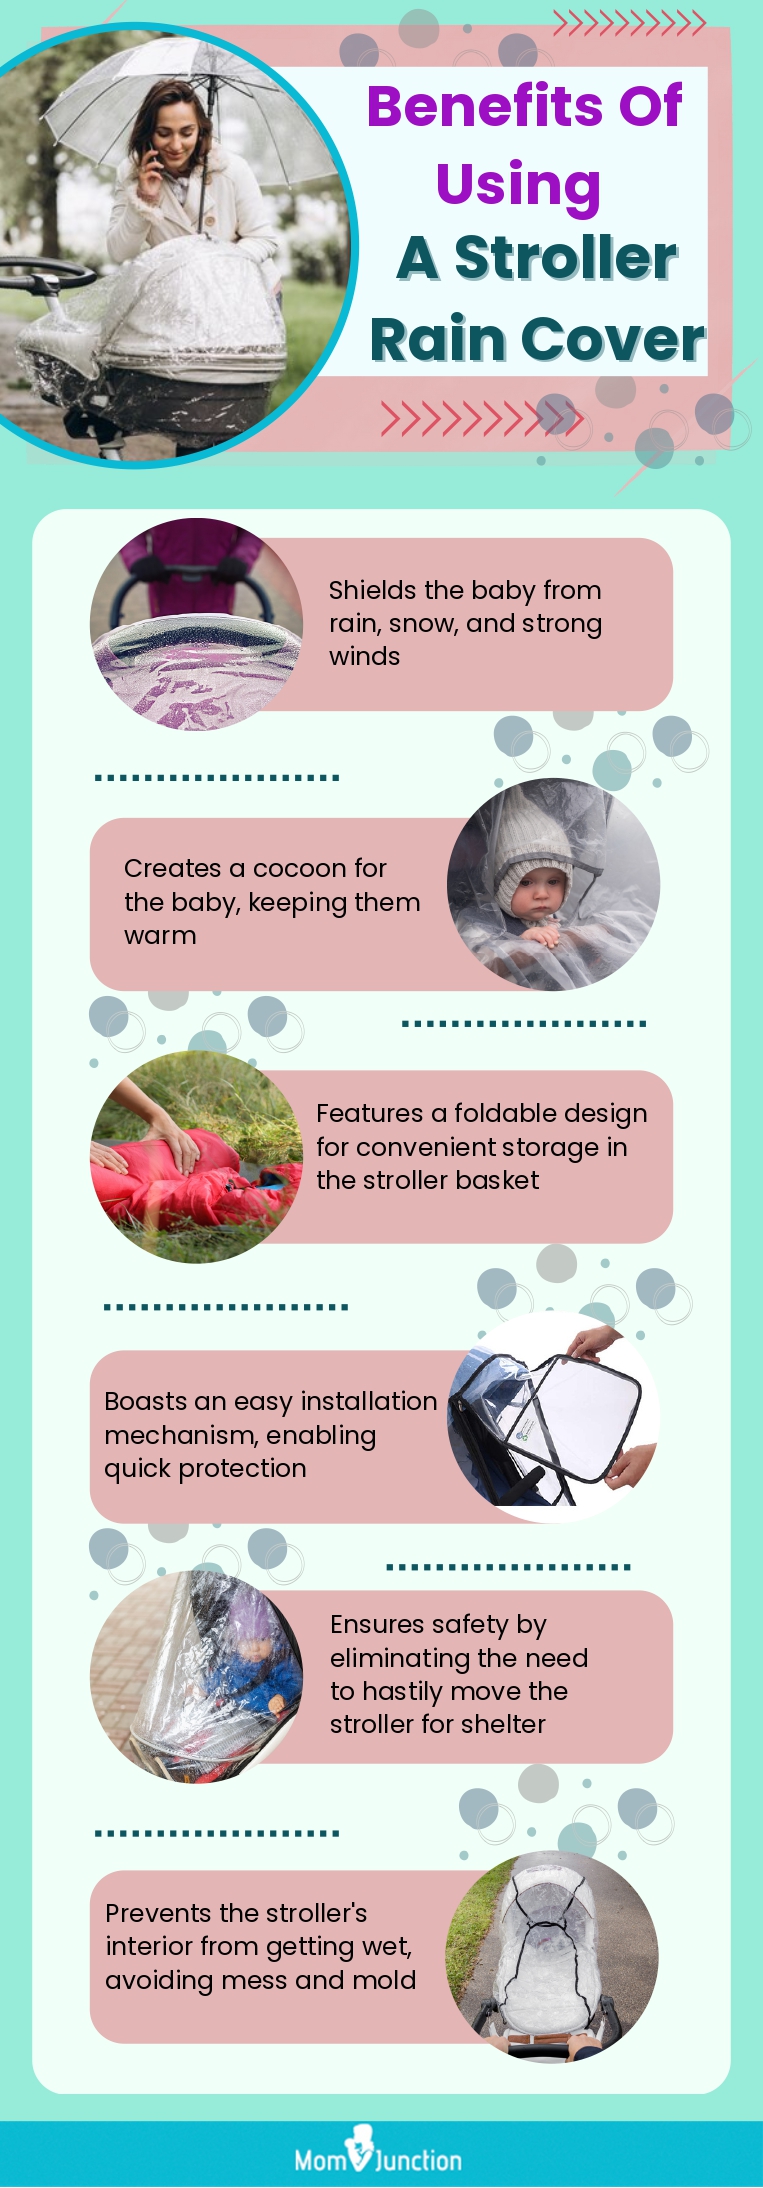 Benefits Of Using A Stroller Rain Cover (infographic)